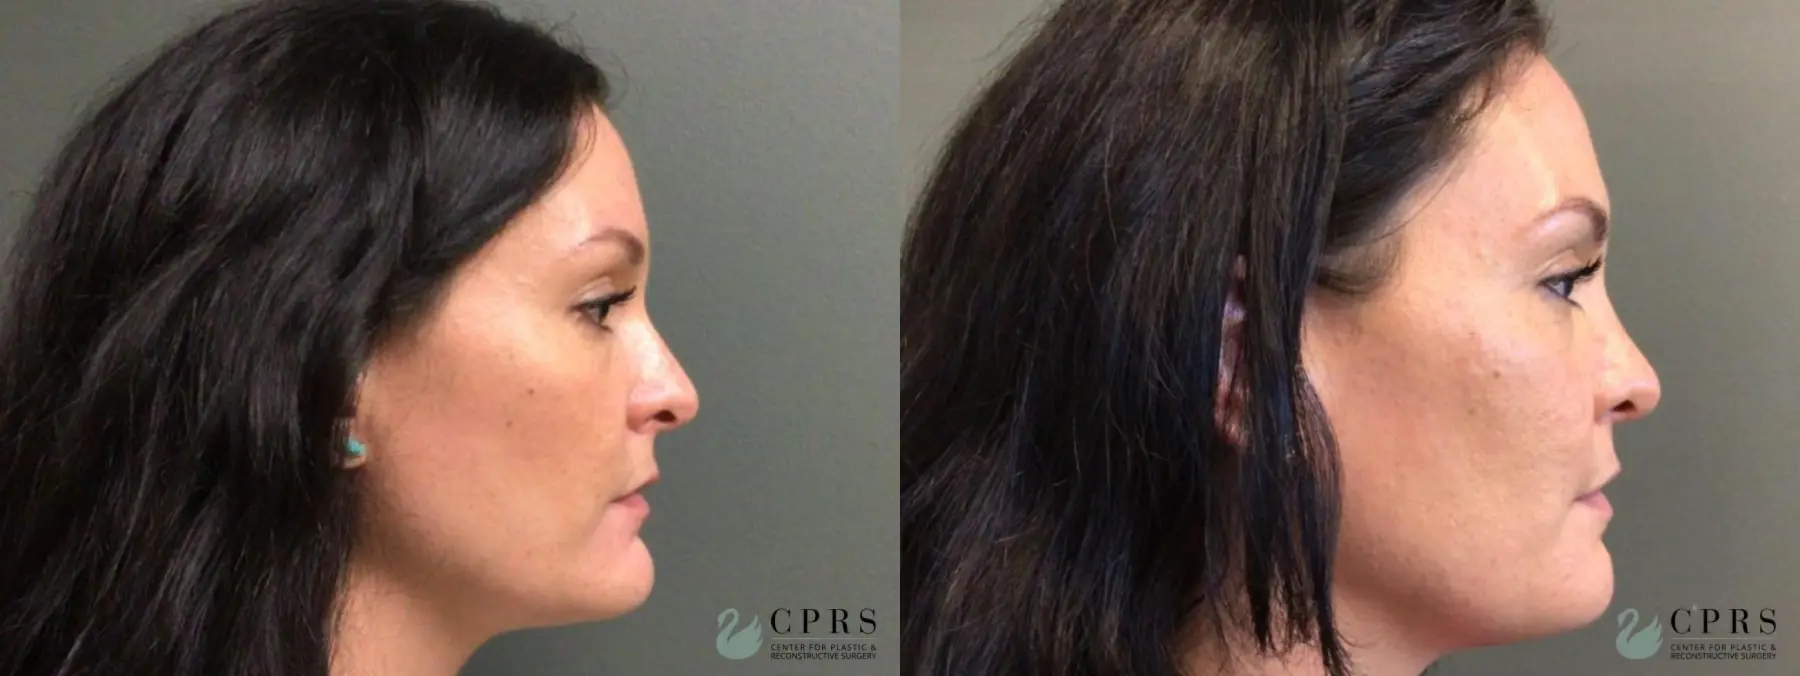 Chin Reduction: Patient 1 - Before and After 2